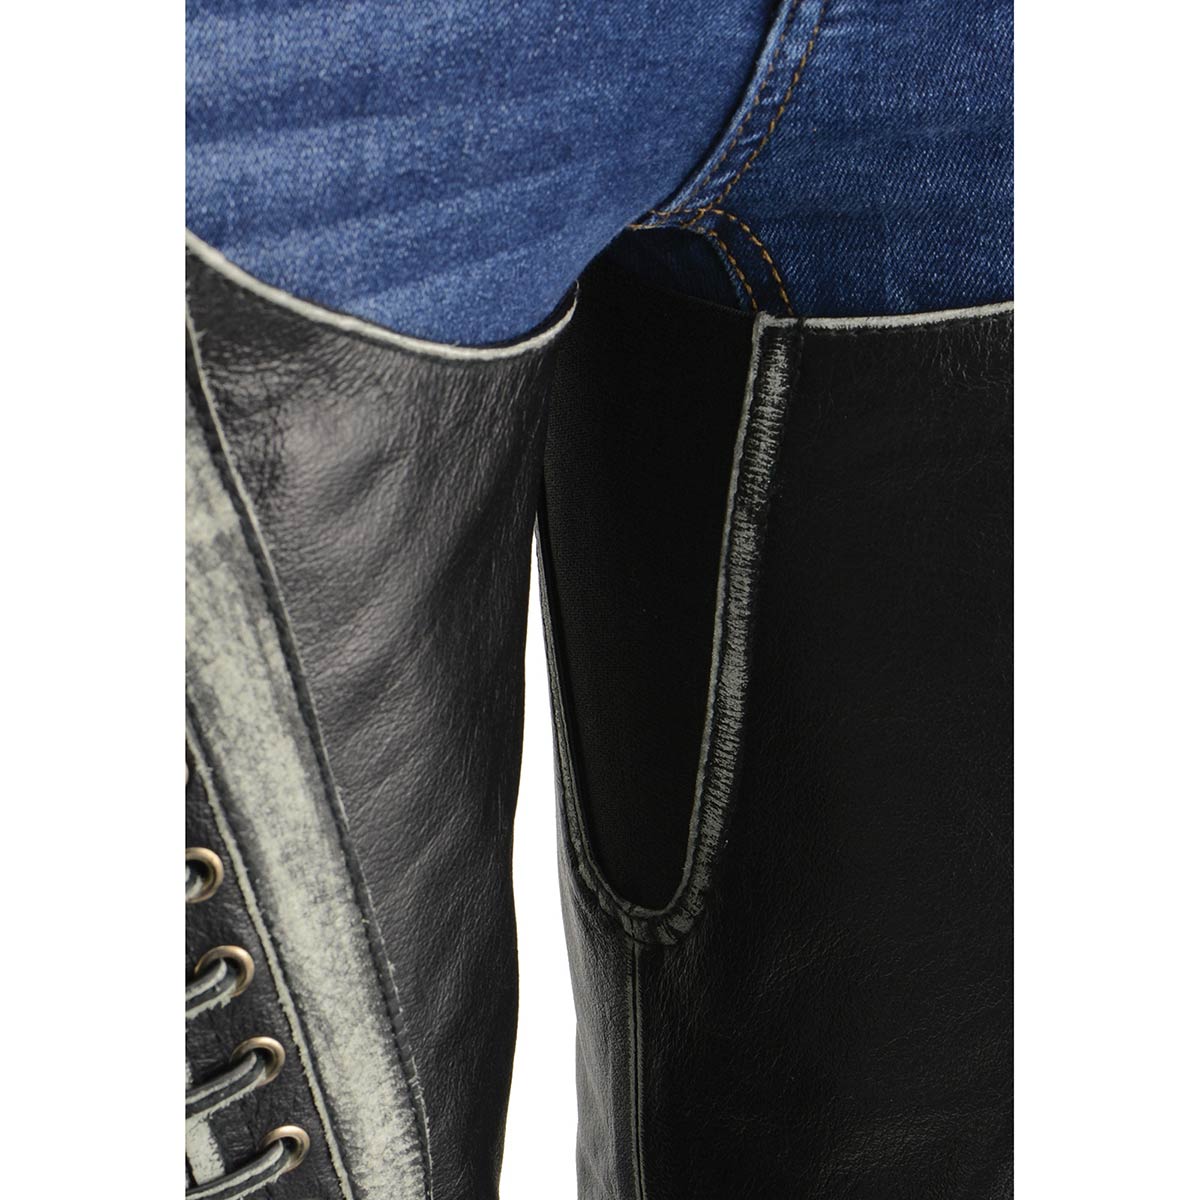 Milwaukee Leather Chaps for Women Black Premium Skin Rubbed Seams- Accented Lace Detailing Motorcycle Chap- MLL6526